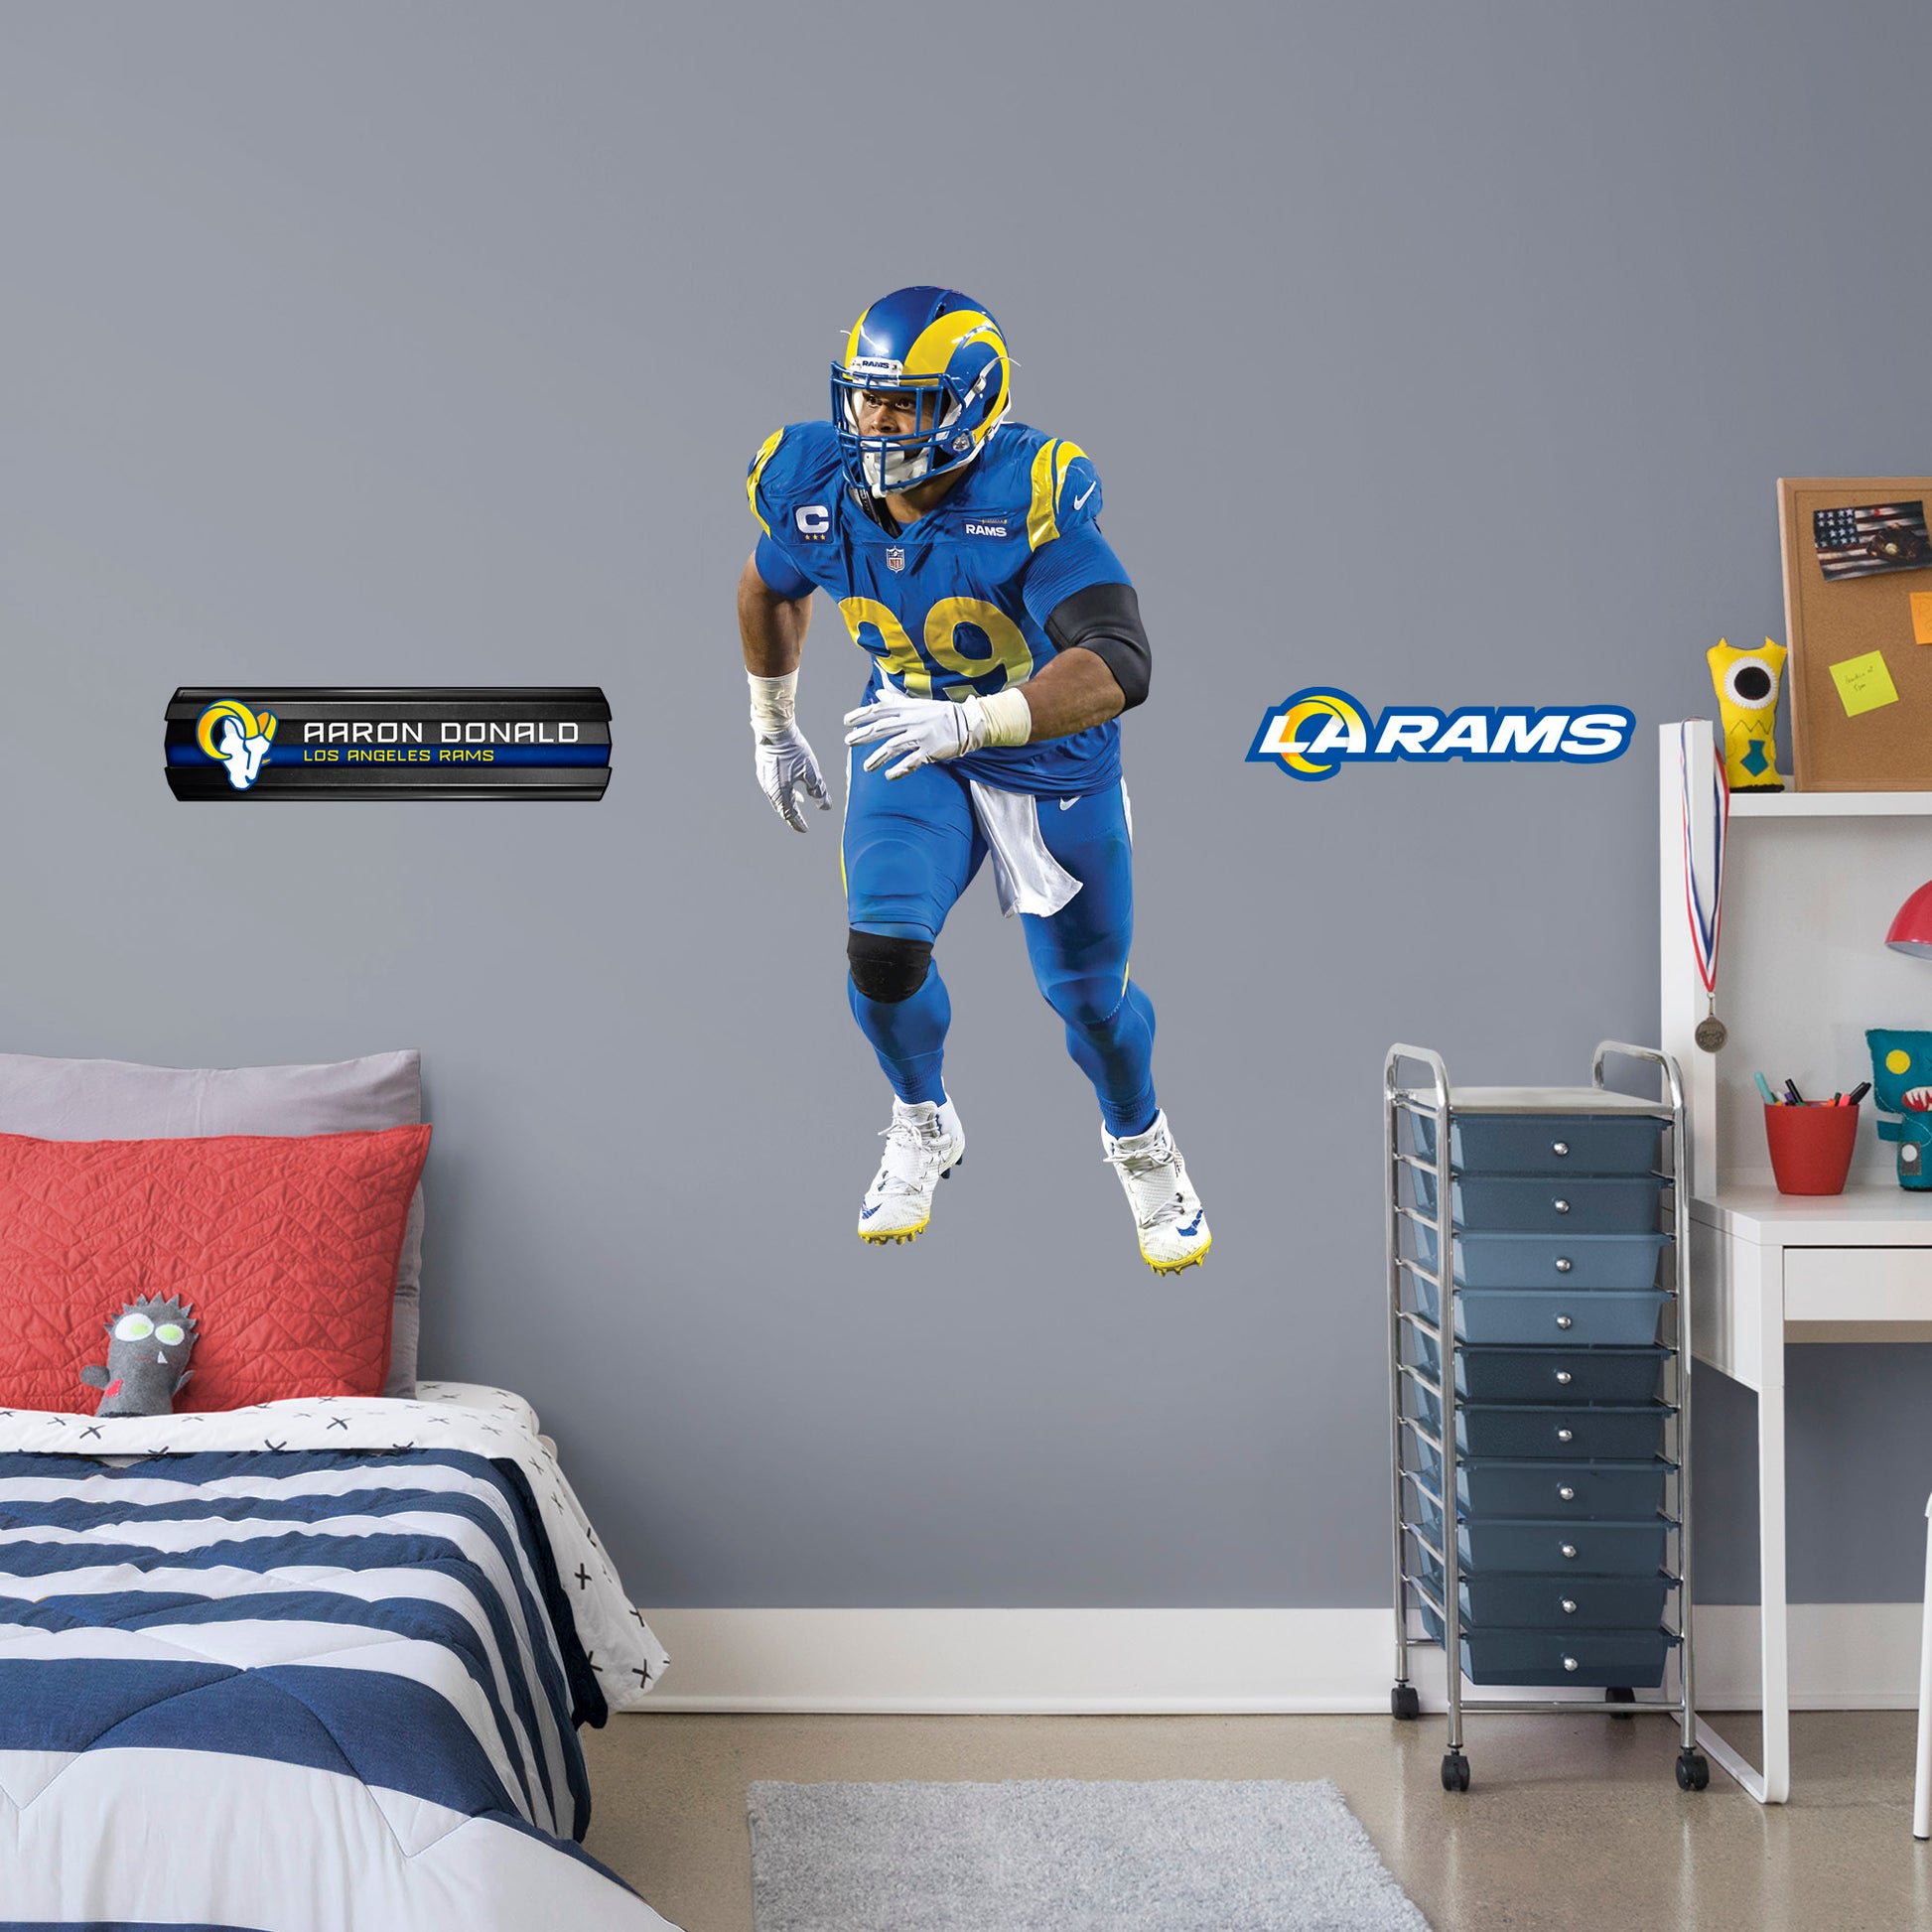 Giant Athlete + 2 Decals (24"W x 51"H) Rams fans know and love Aaron Donald as the star defensive tackle from their favorite team and now they can bring home that Los Angeles pride with an Aaron Donald Removable Wall Decal Set! This wall decal is vibrant and durable so you'll be able to stick it and move it over and over again. Go Rams!